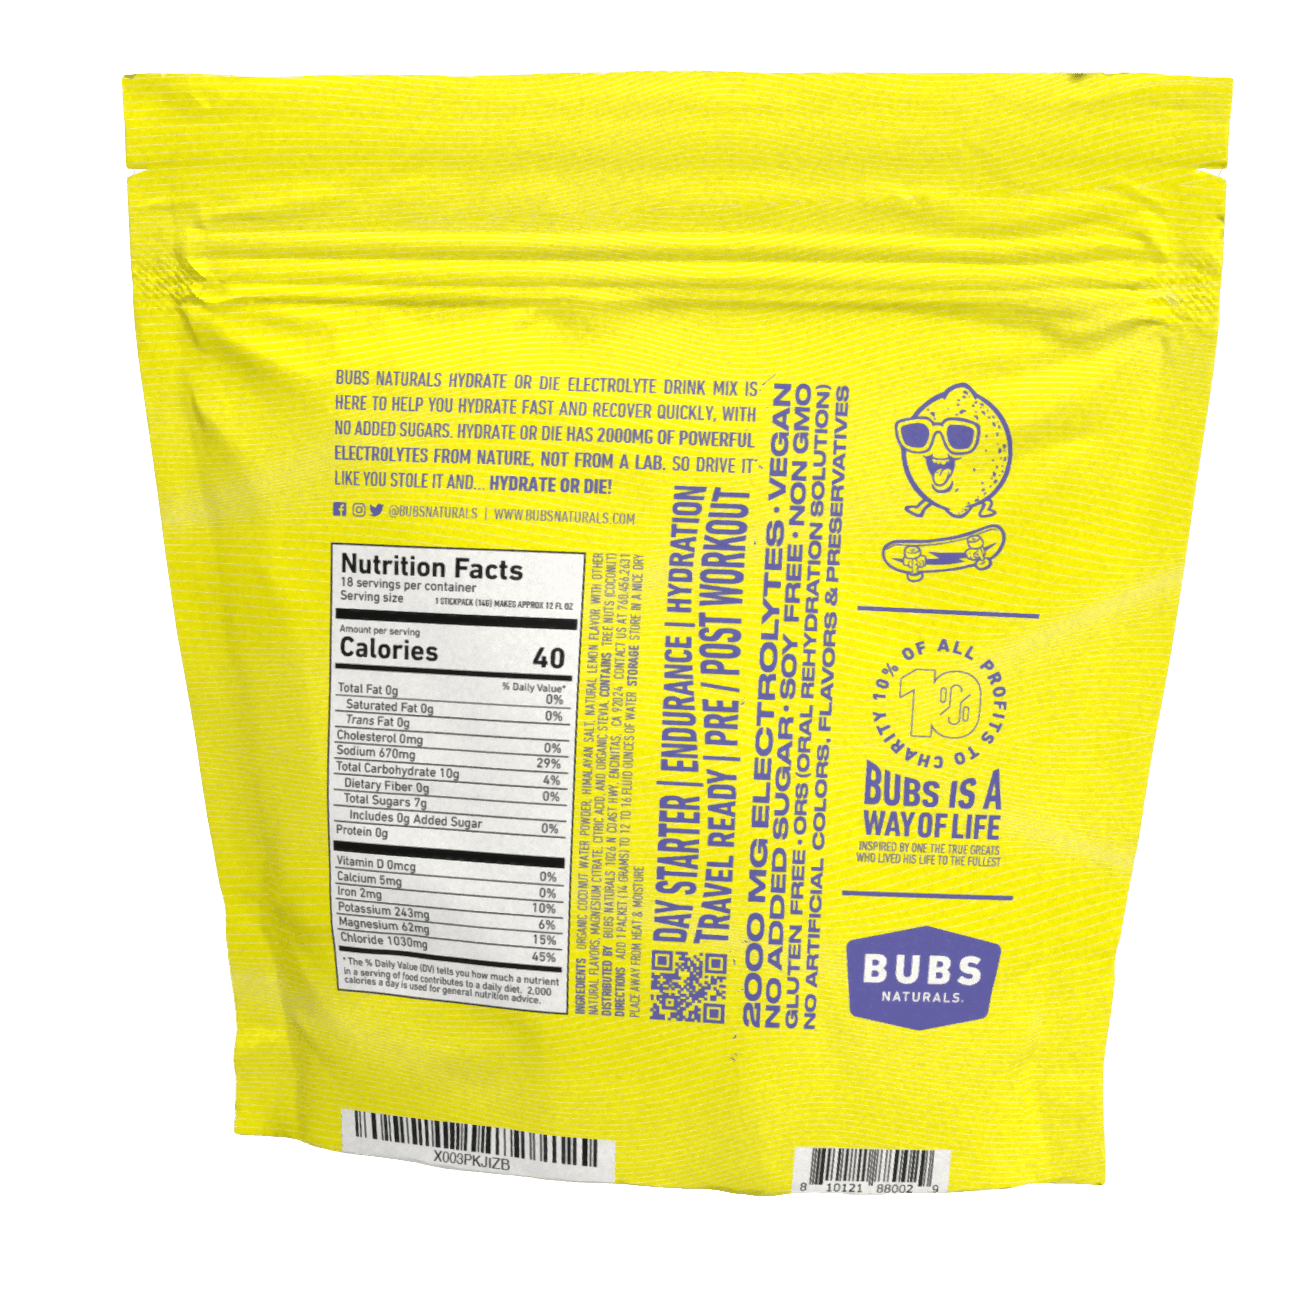 BUBS Naturals Lemon Hydrate or Die 2000mg Electrolyte Sticks, 18 Count Bag, Back Right Nutrition Facts